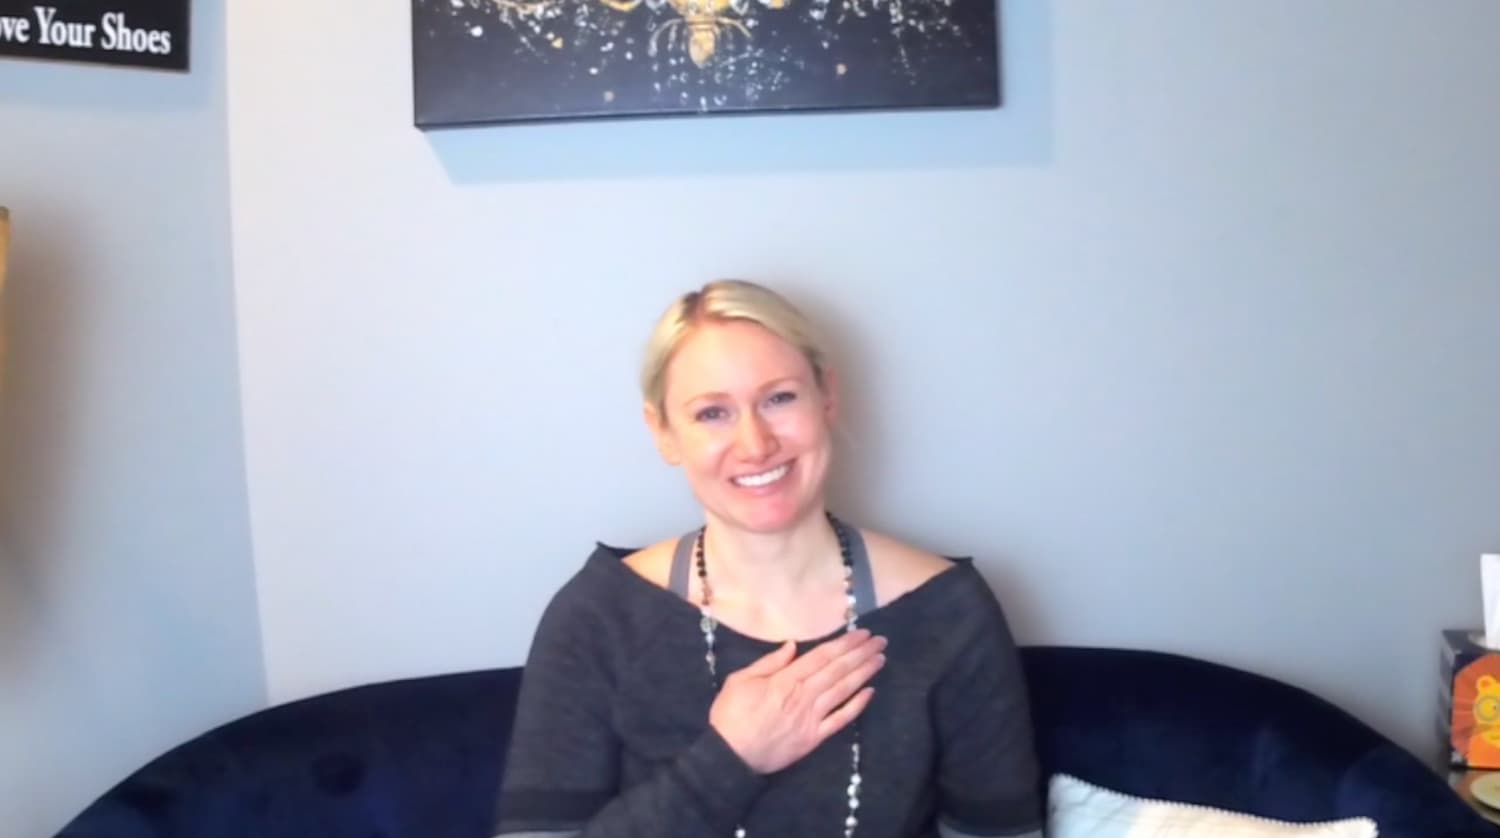 Justine smiles at the camera after completing a guided meditation.